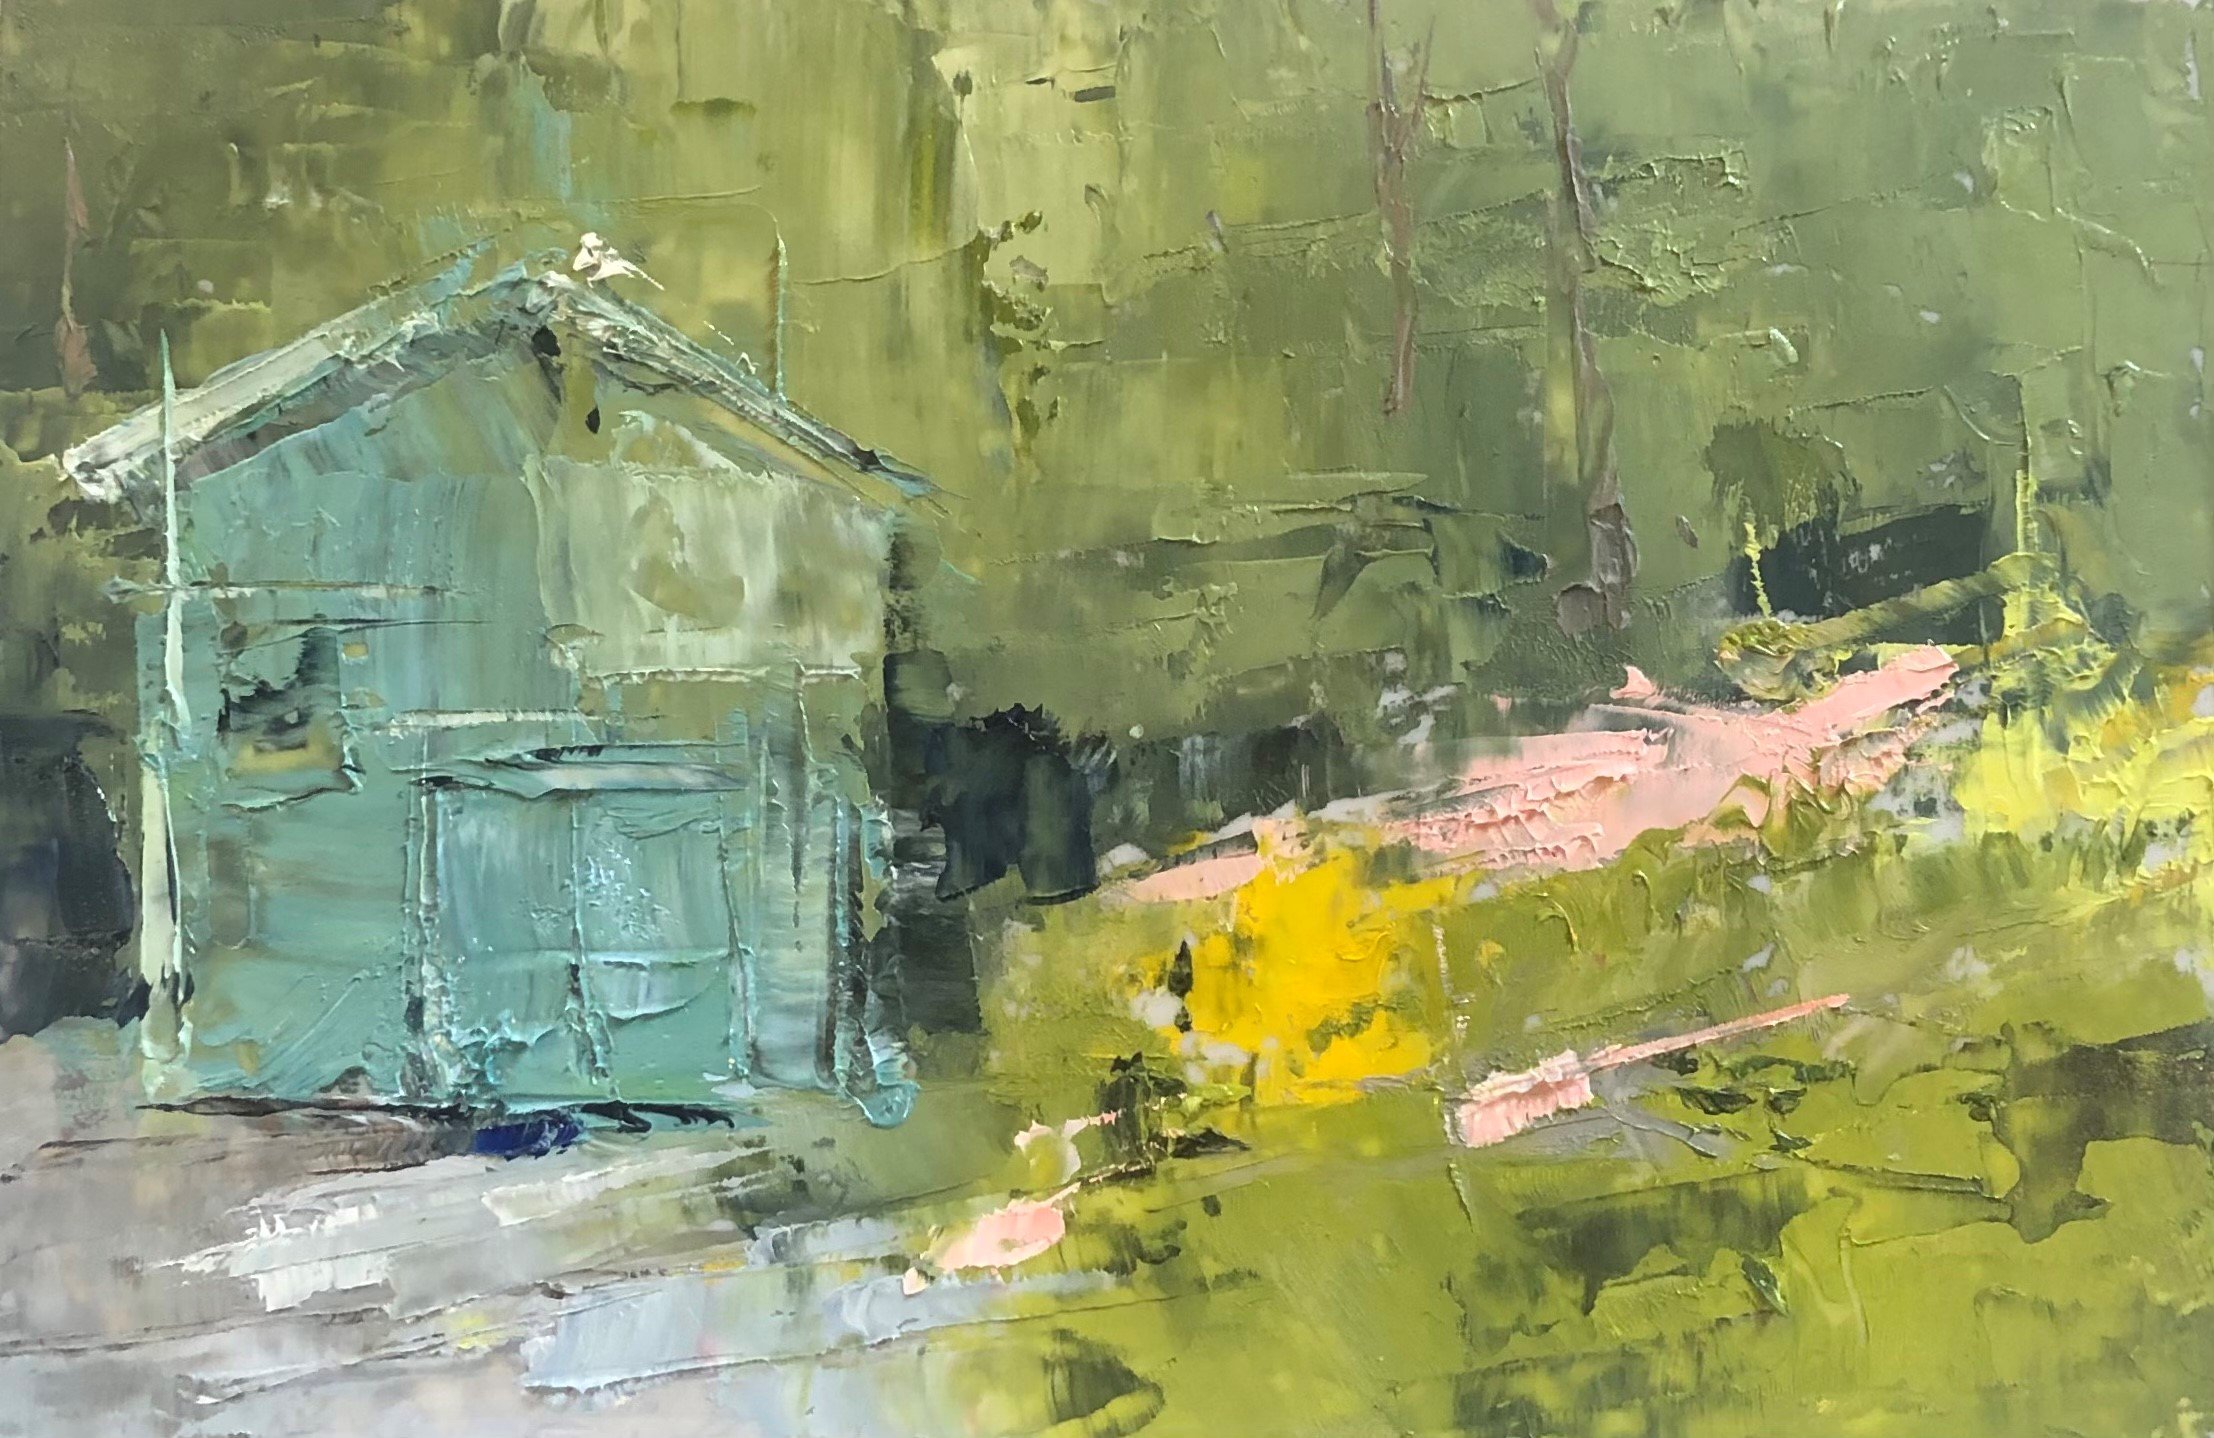 Garden Shed oil and CWM on Yupo paper 3x5 framed 8x10.jpg